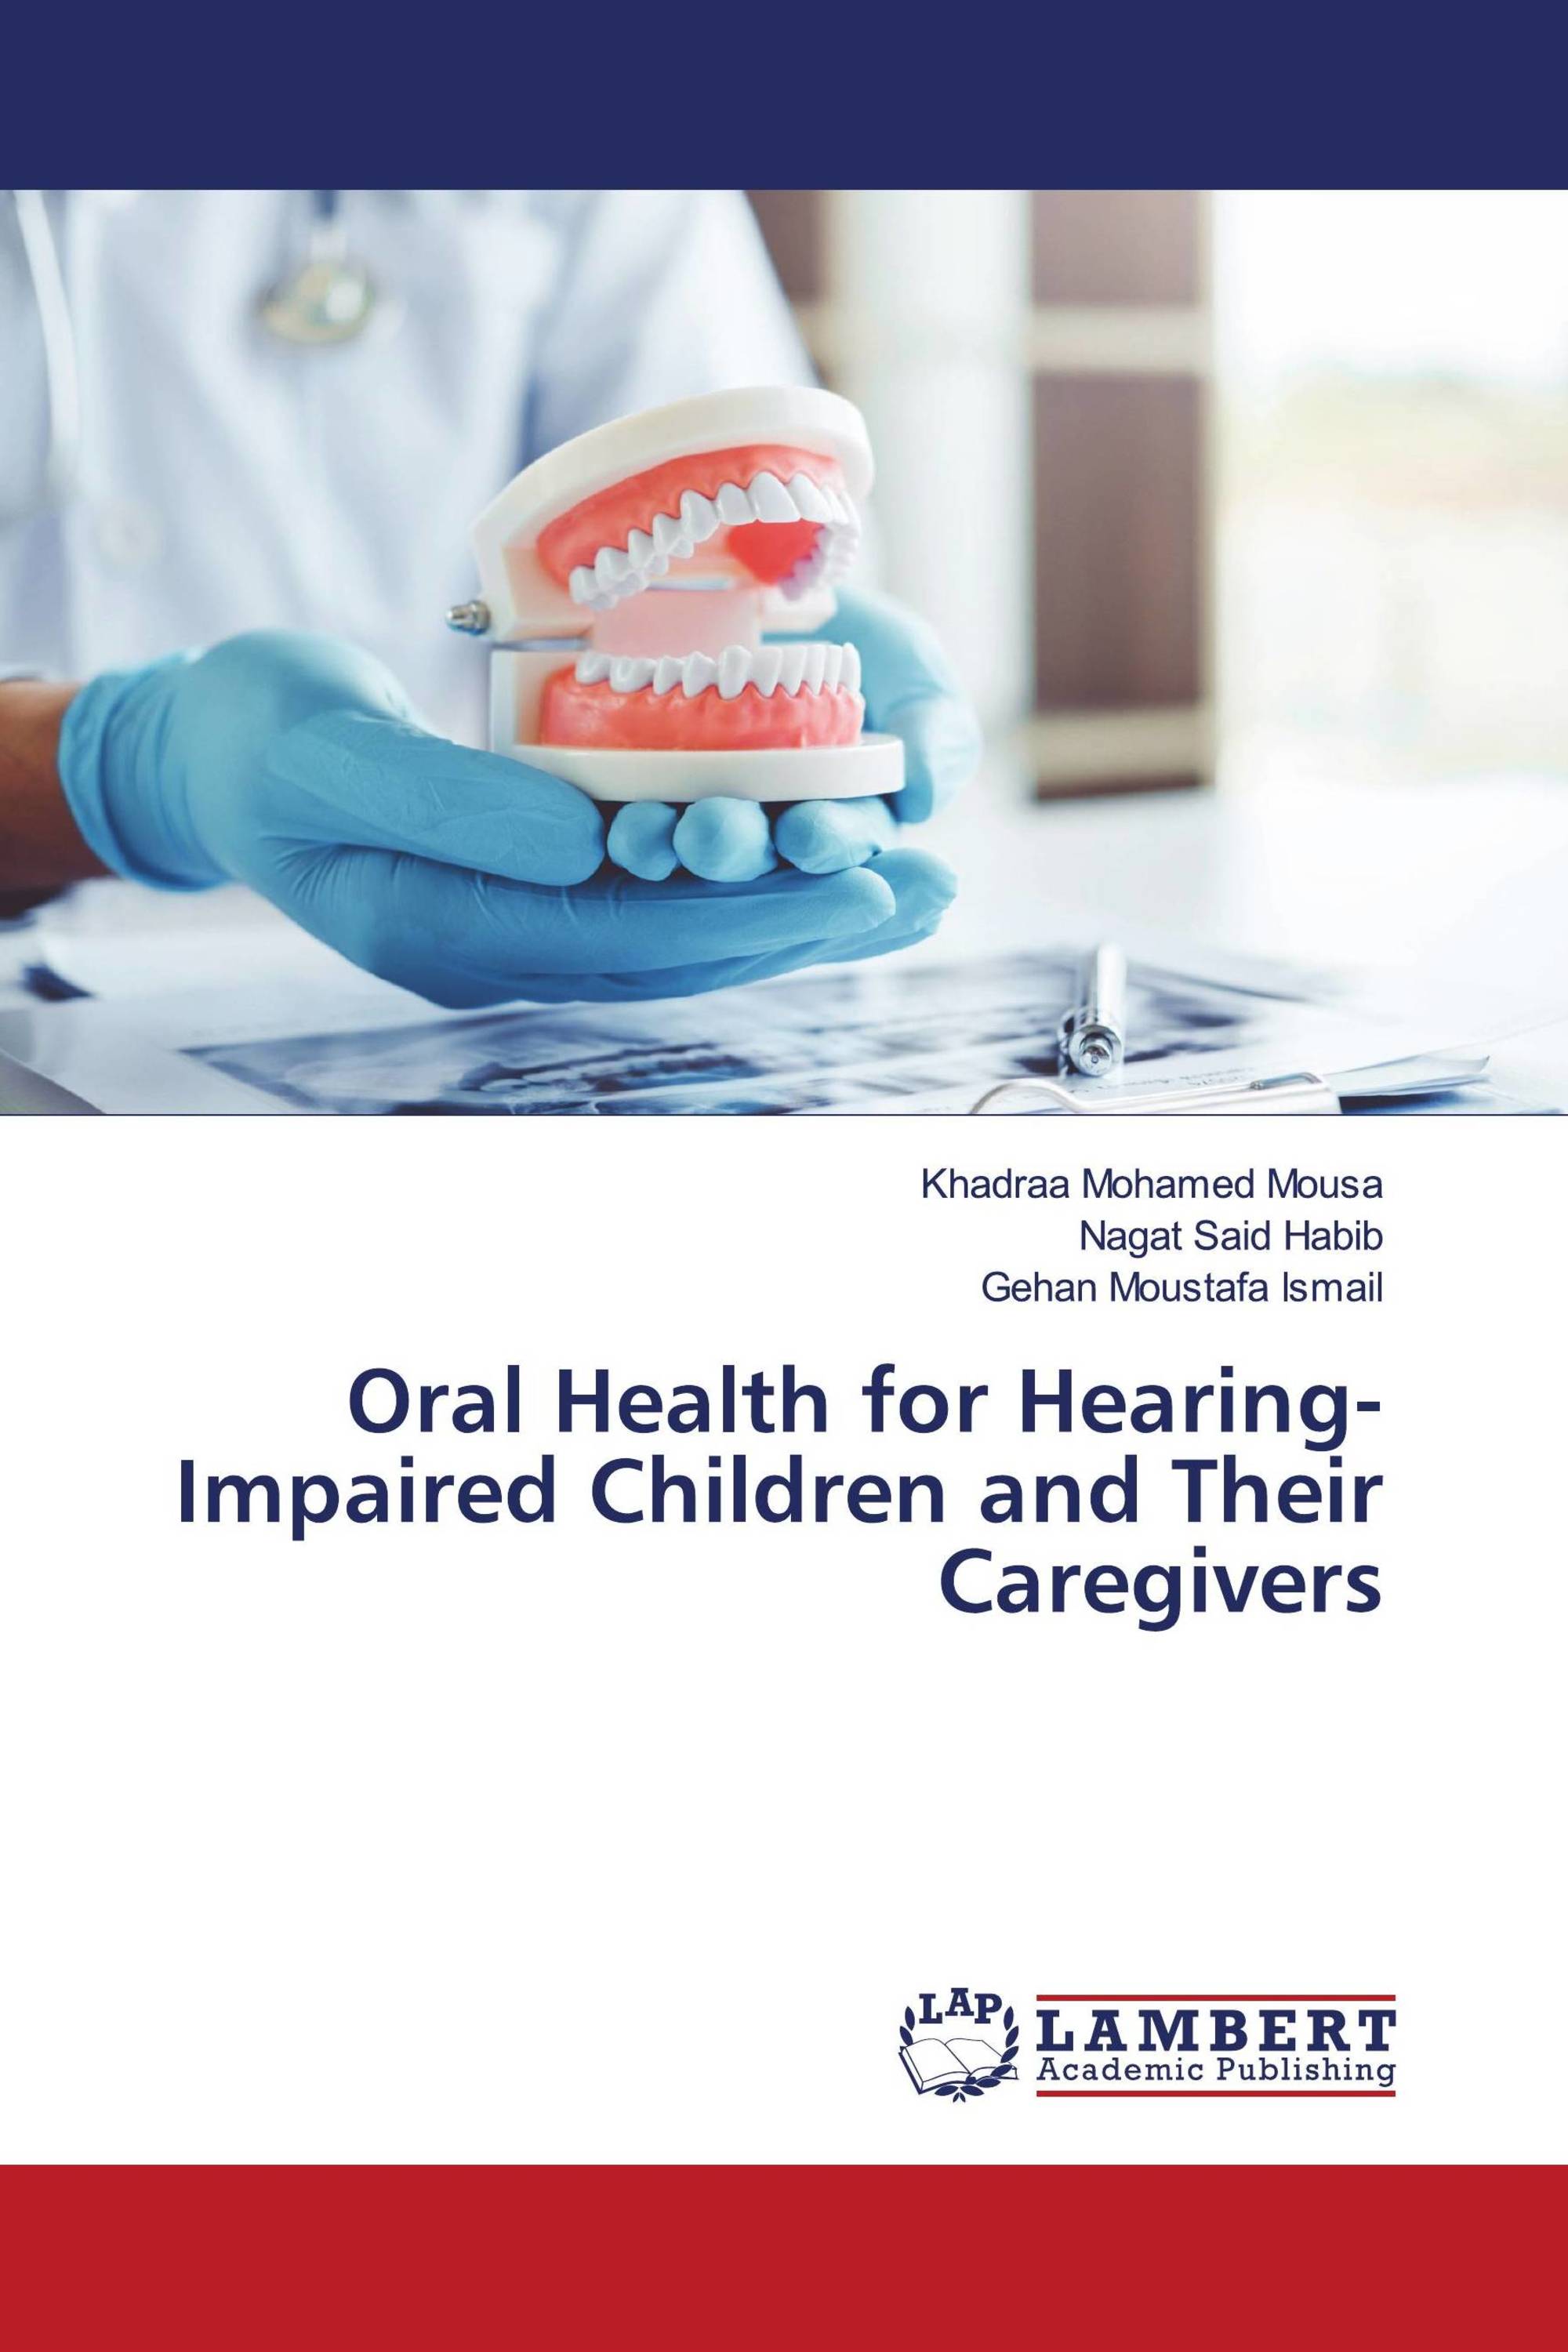 Oral Health for Hearing-Impaired Children and Their Caregivers